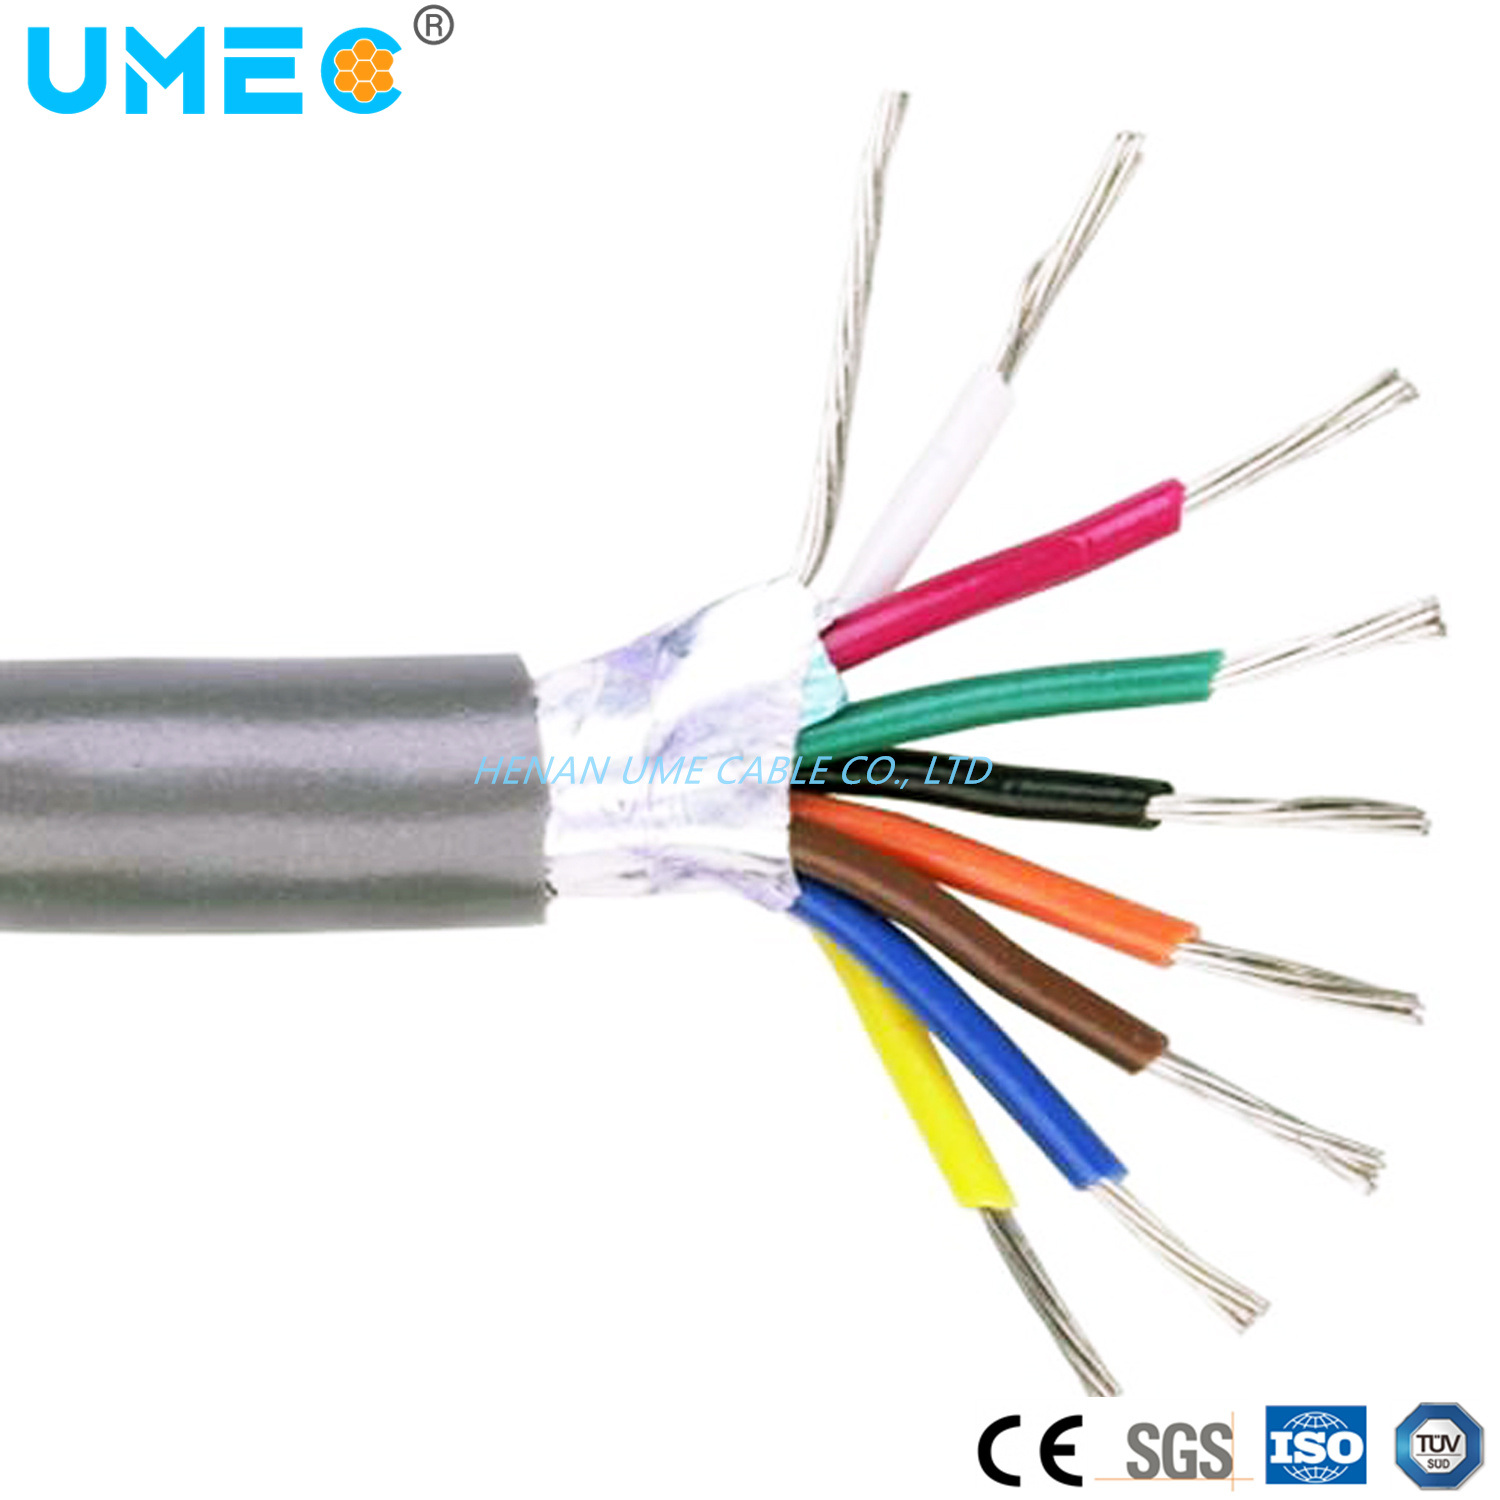 Shielding Cable 300/500V PVC Insulation Sheath Control Cable